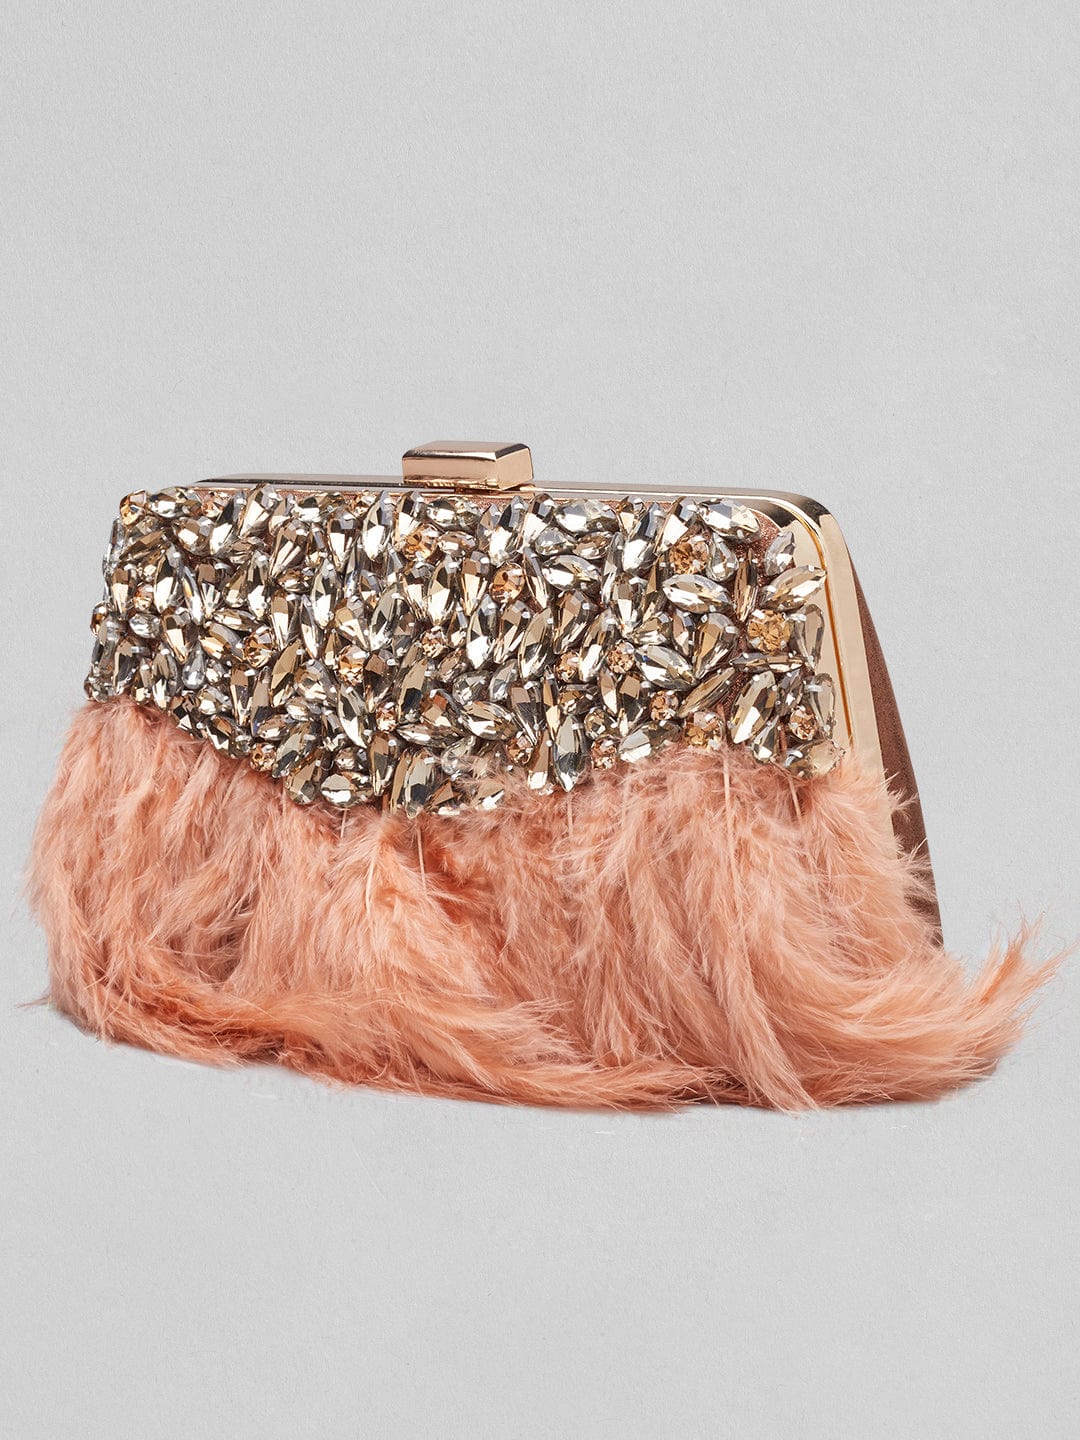 Rubans Brown Colour Clutch Bag With Studded Stone And Brown Fur. Handbag &amp; Wallet Accessories